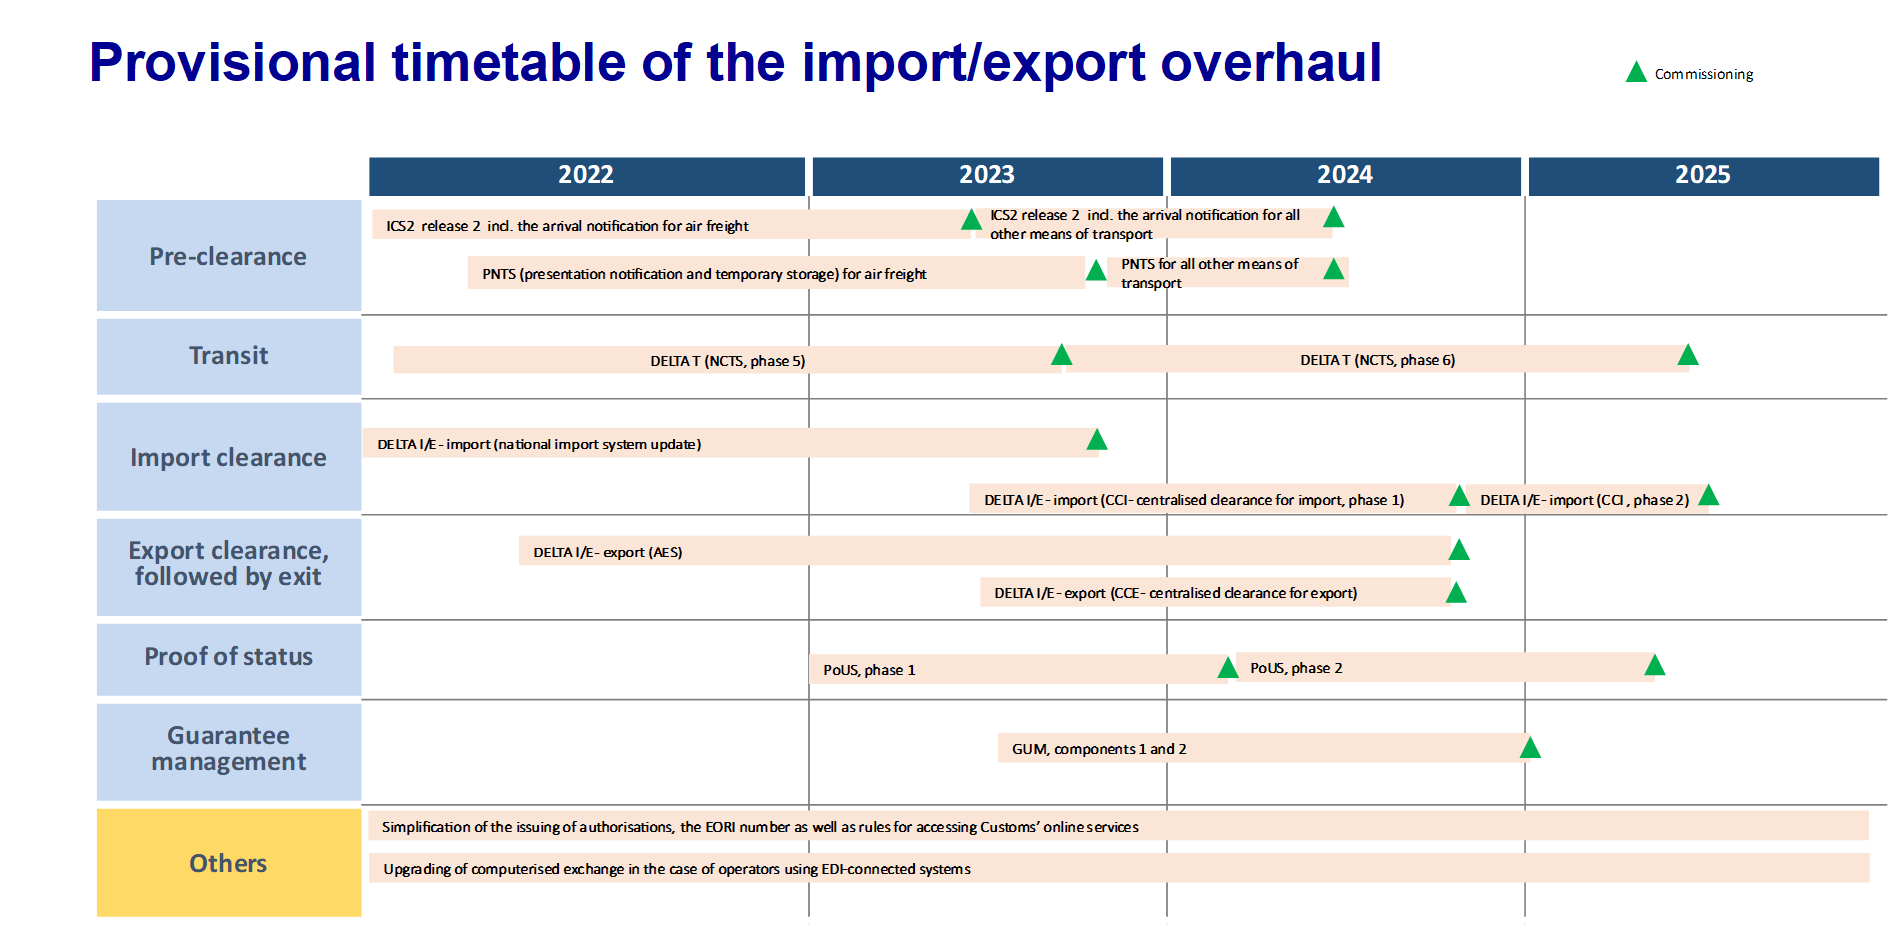 Provisional timetable of the import-export overhaul